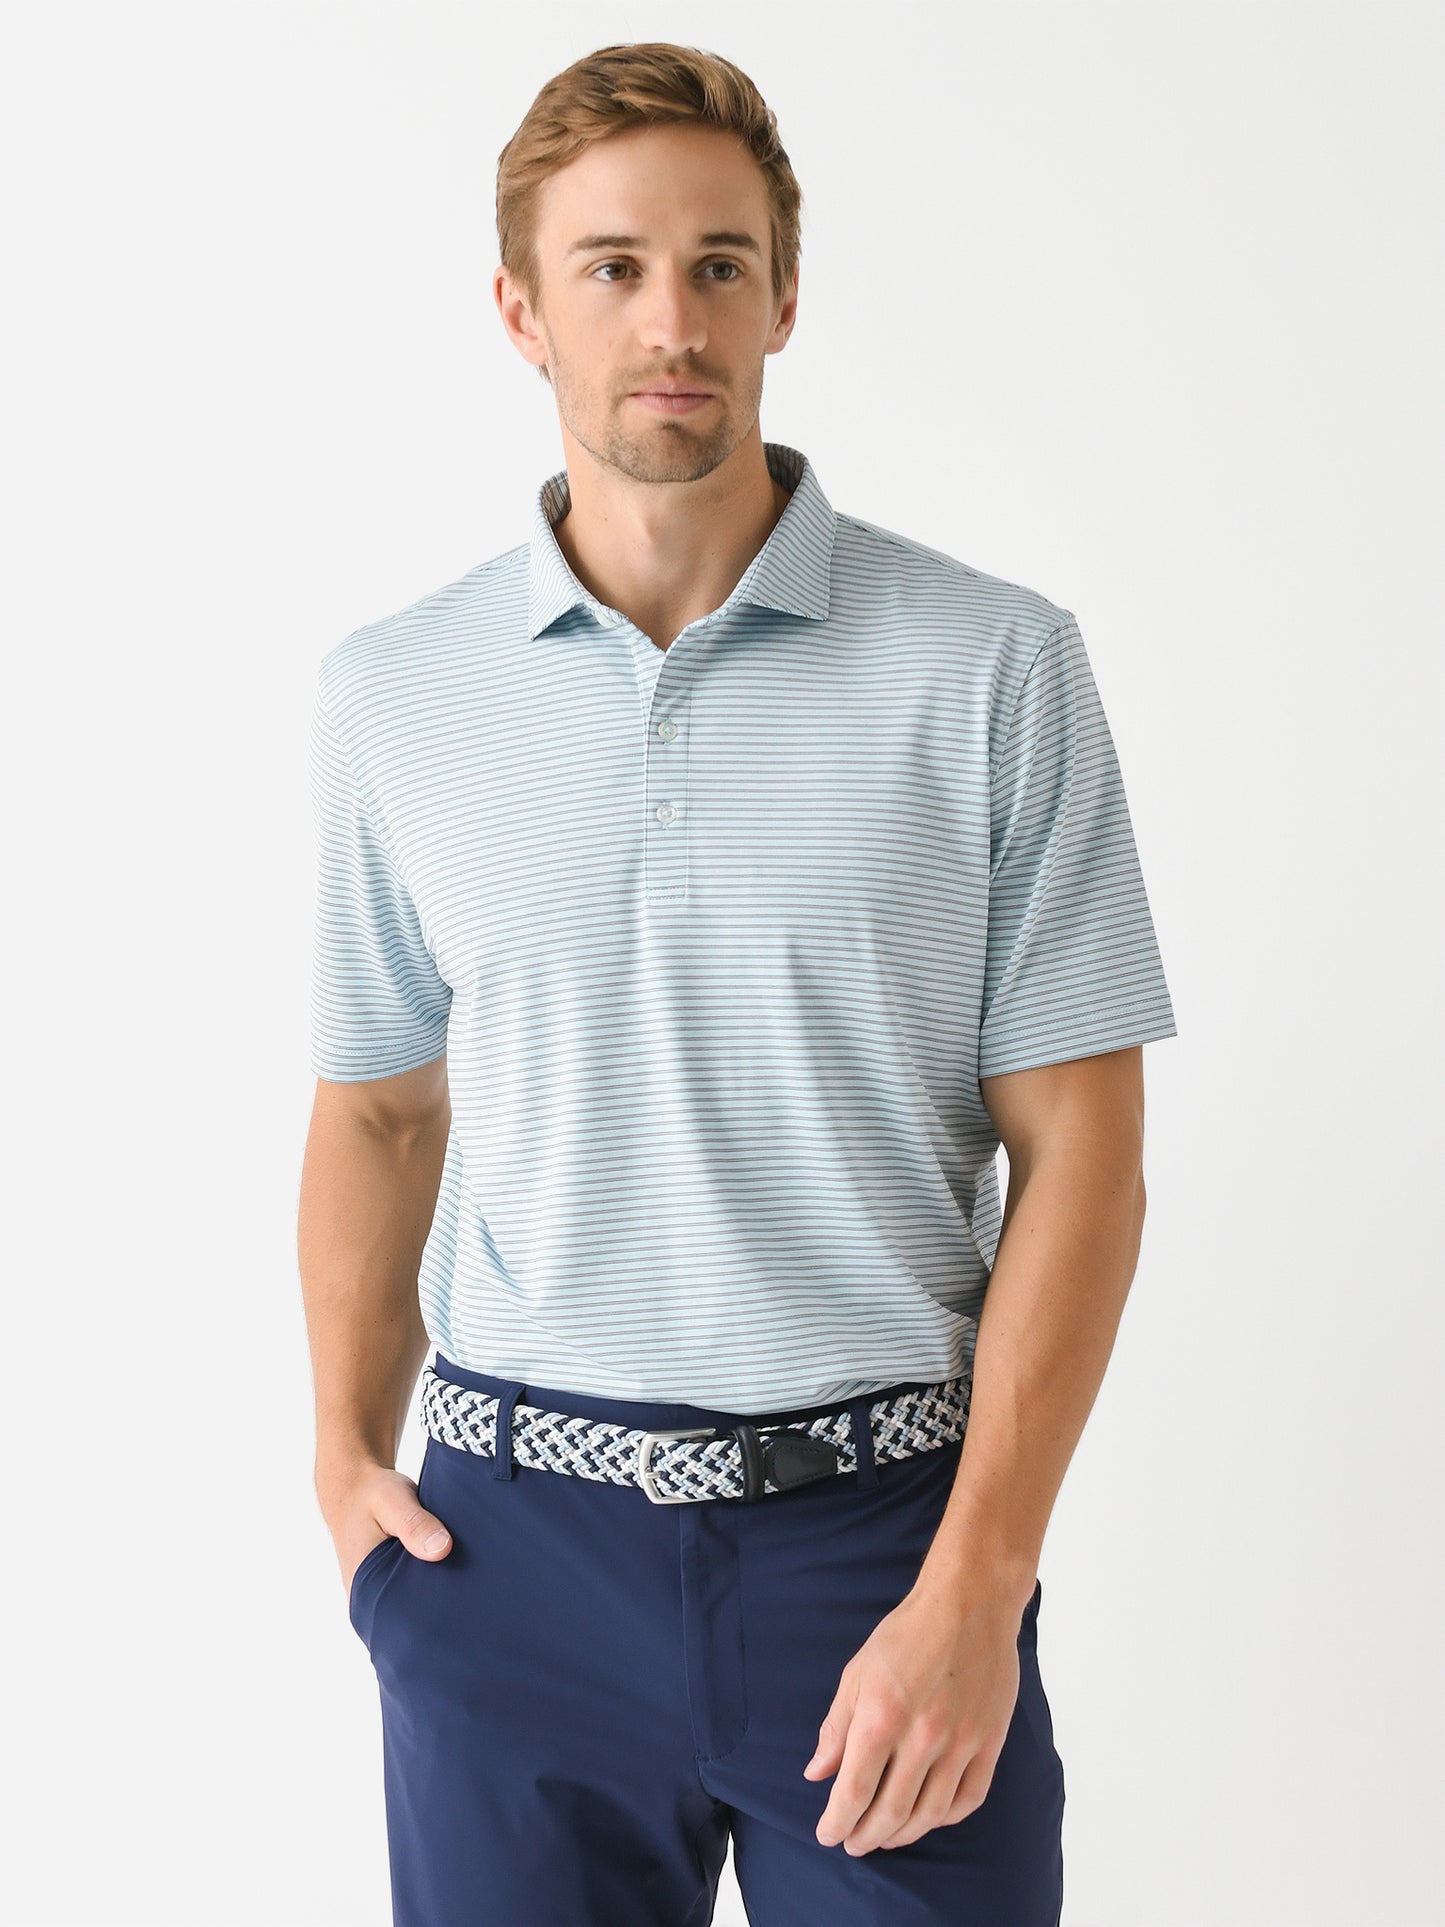 Johnnie-O Men's Michael Striped Jersey Performance Polo